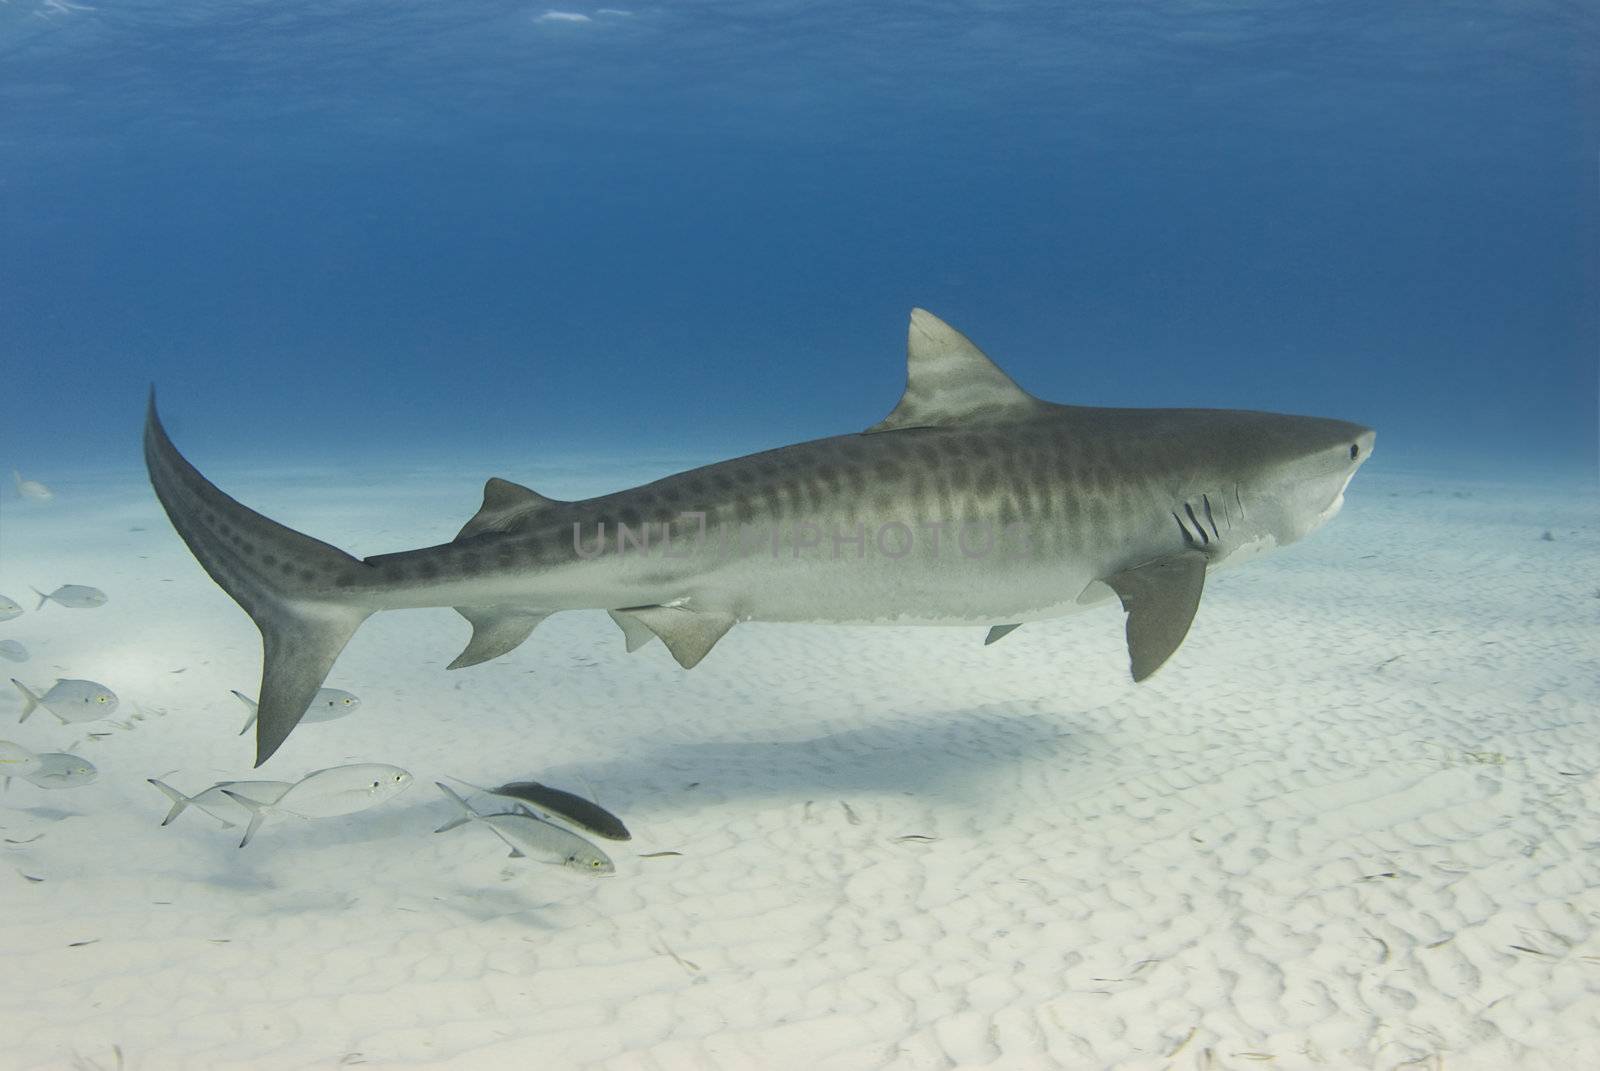 A Tiger Shark (Galeocerdo cuvier) swims along the shallow water as a school of fish follows